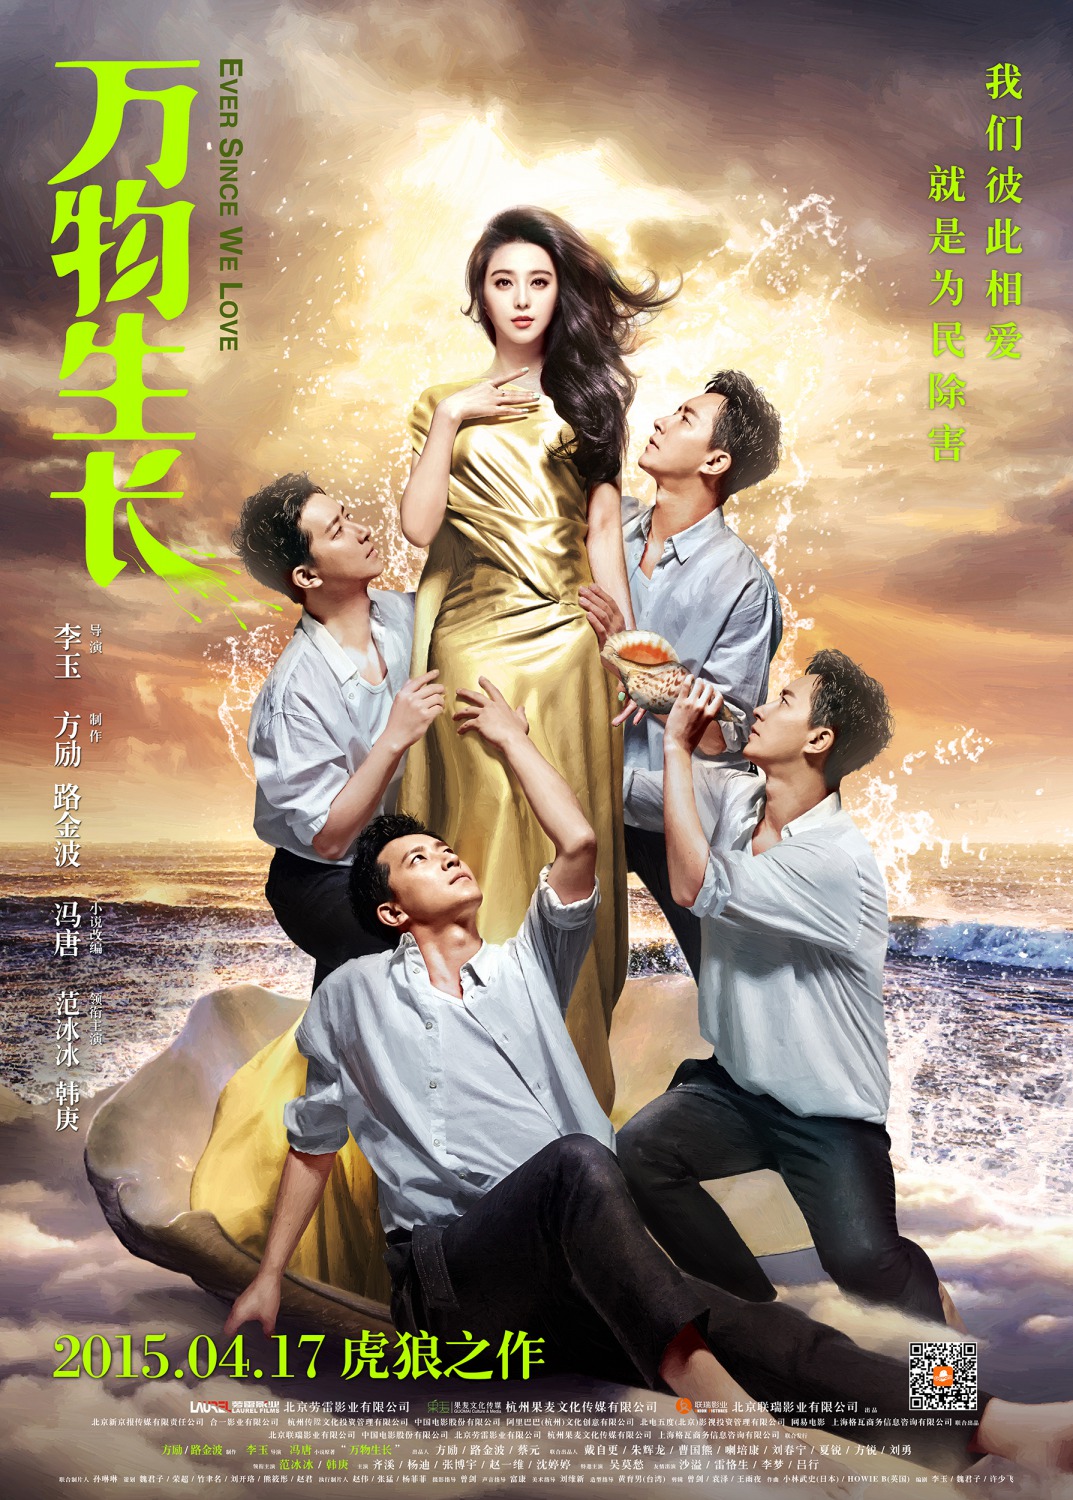 Extra Large Movie Poster Image for Wan Wu Sheng Zhang (#2 of 4)